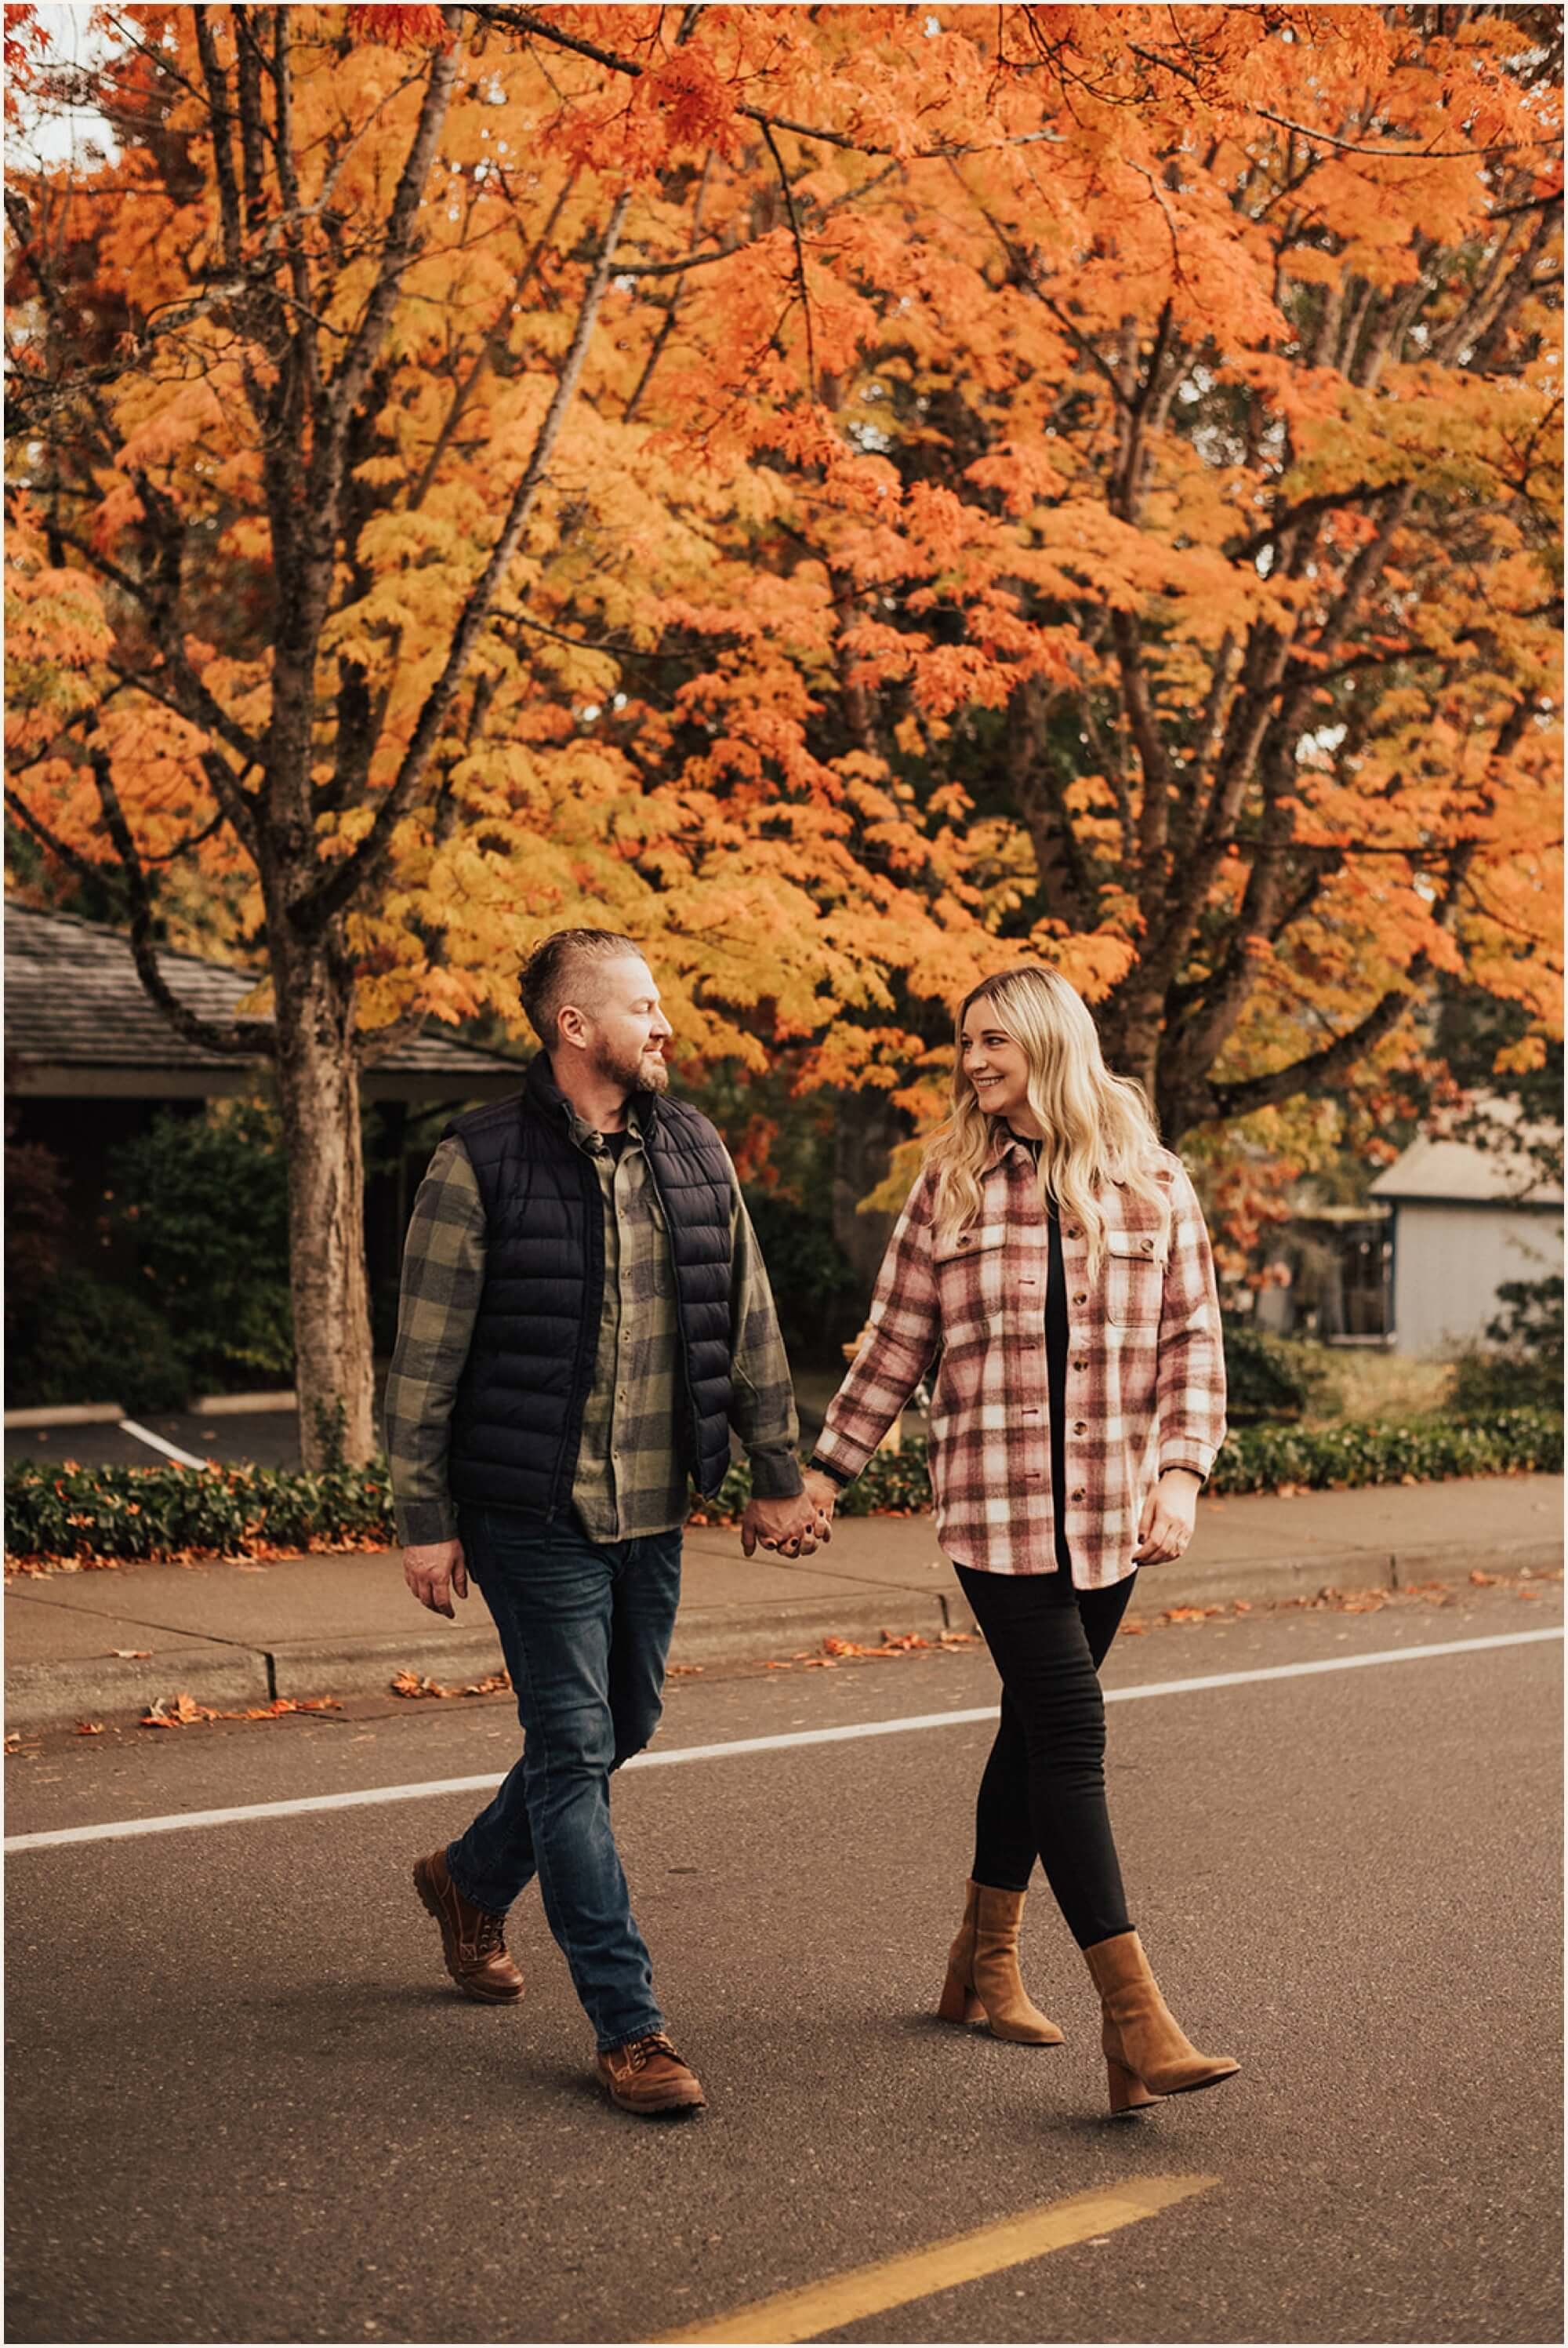 Couple holding hands while walking across street with fall foliage in background